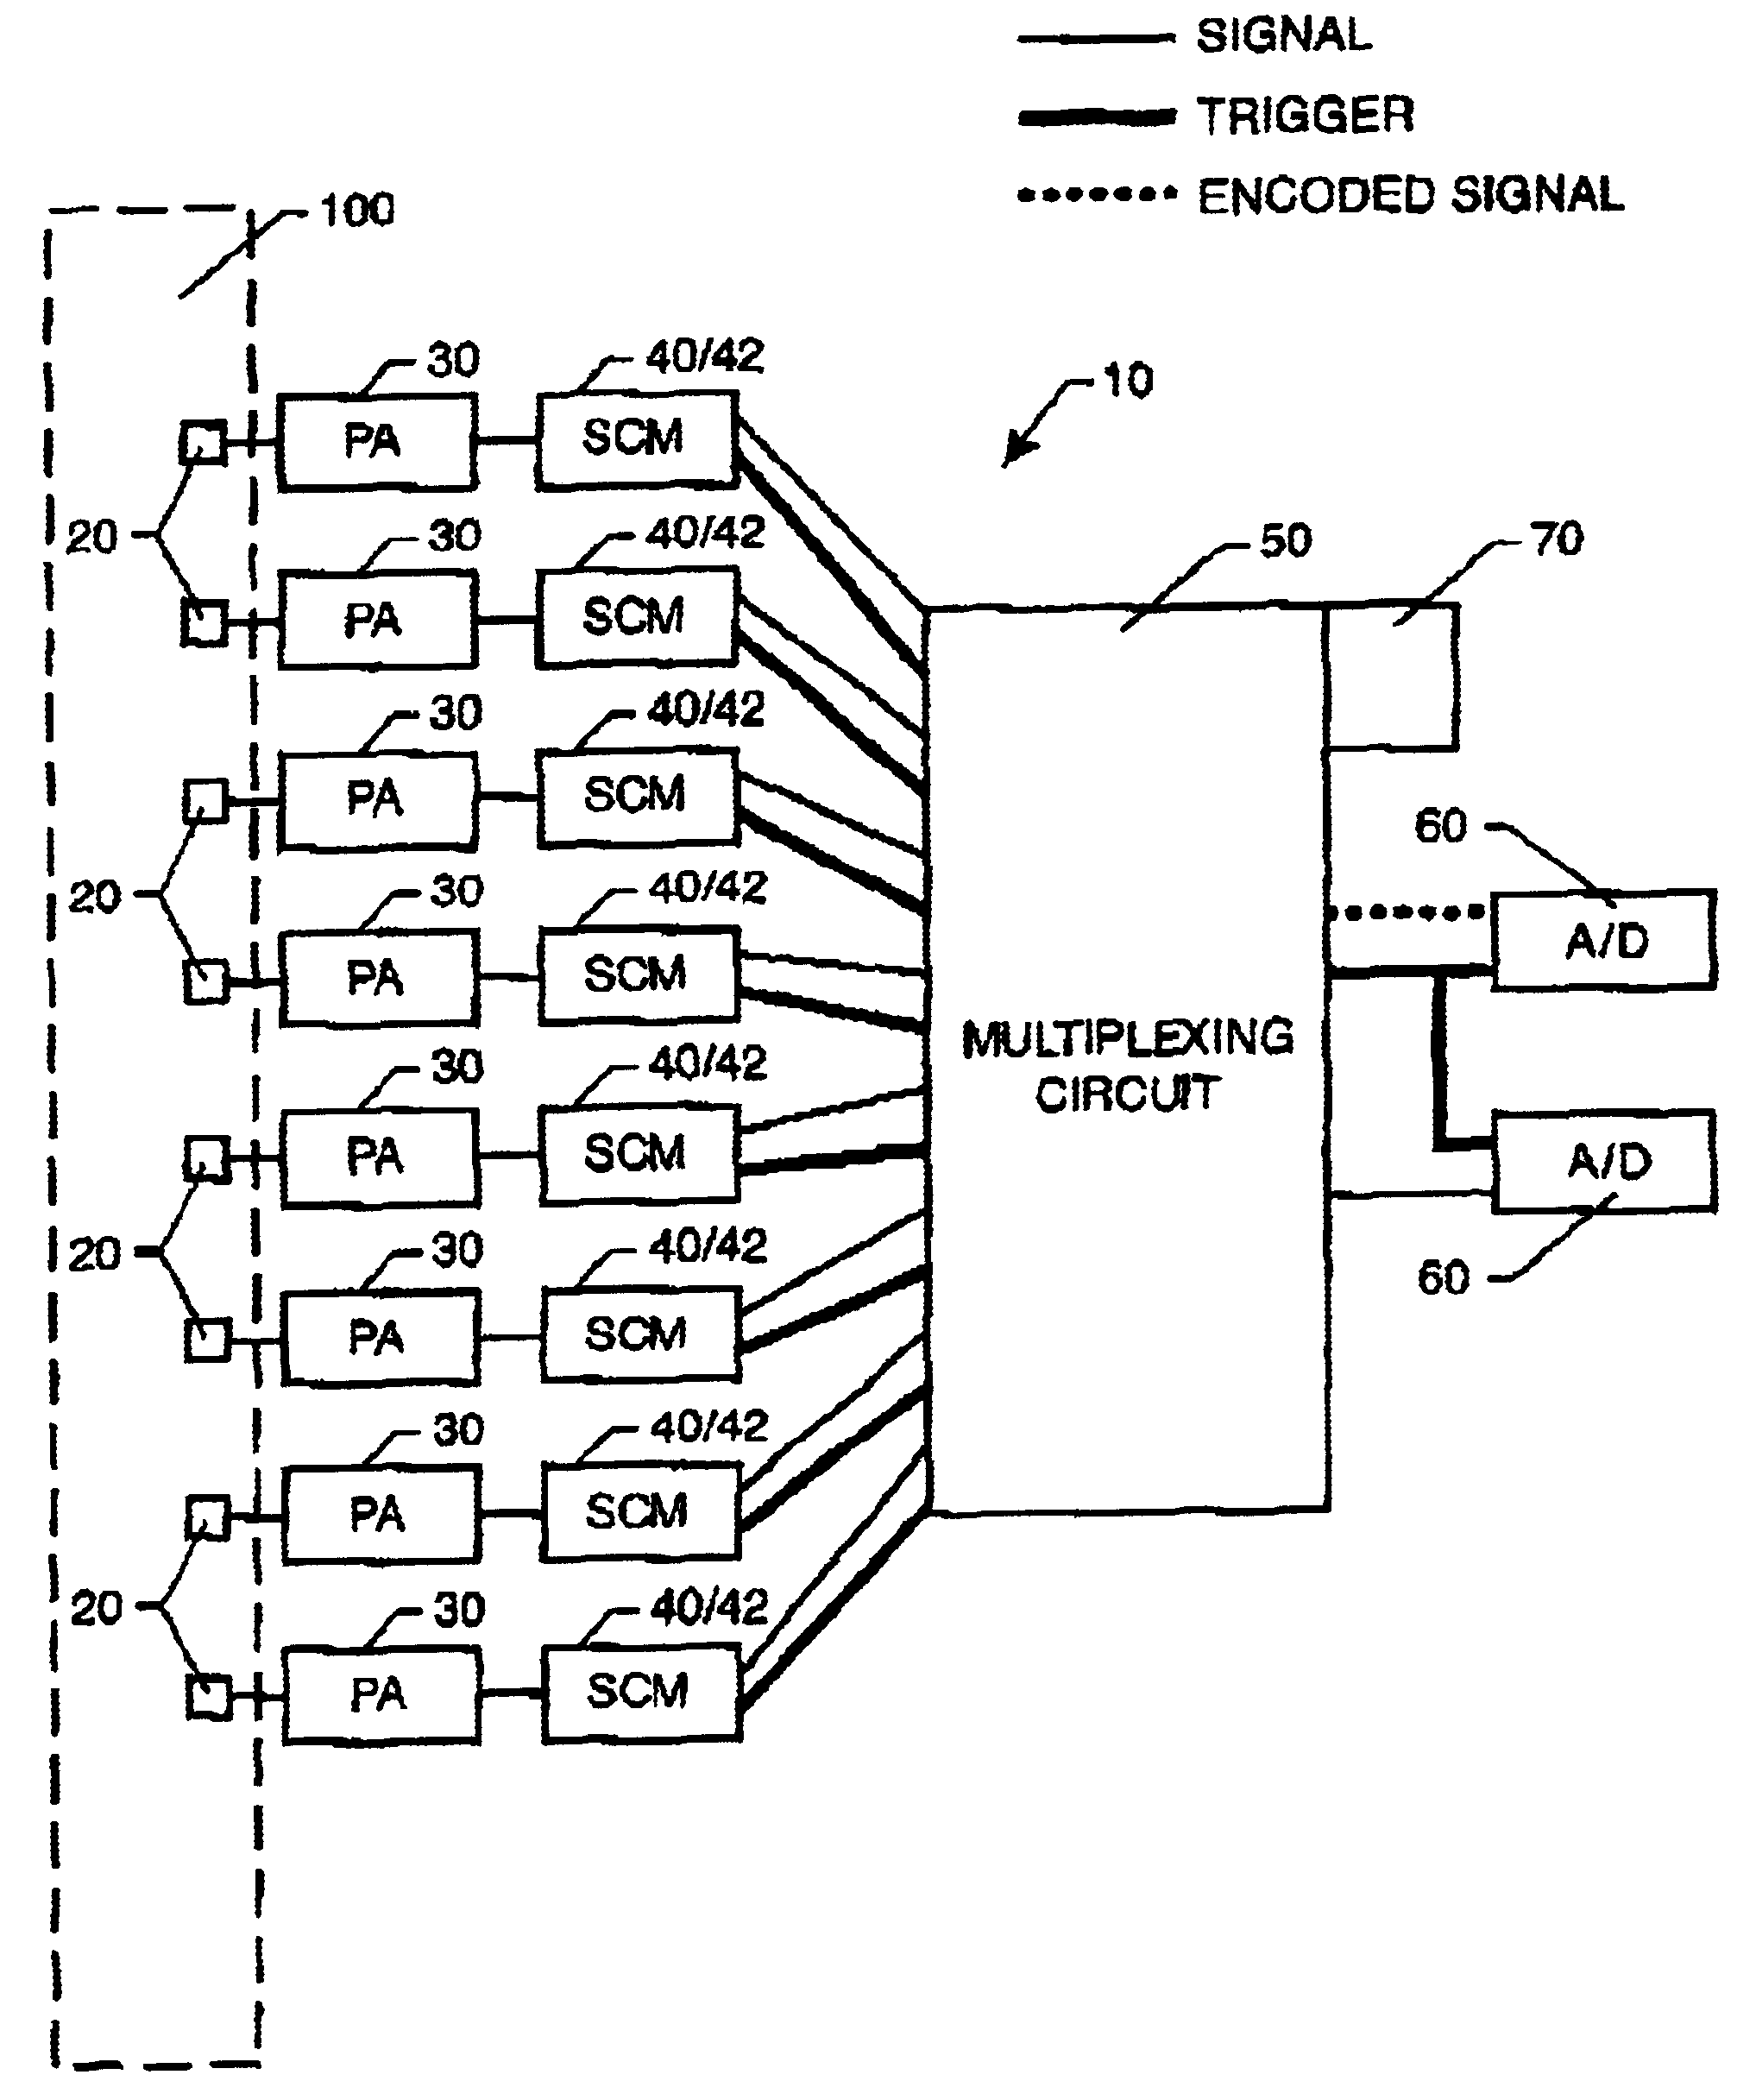 System for multiplexing acoustic emission (AE) instrumentation